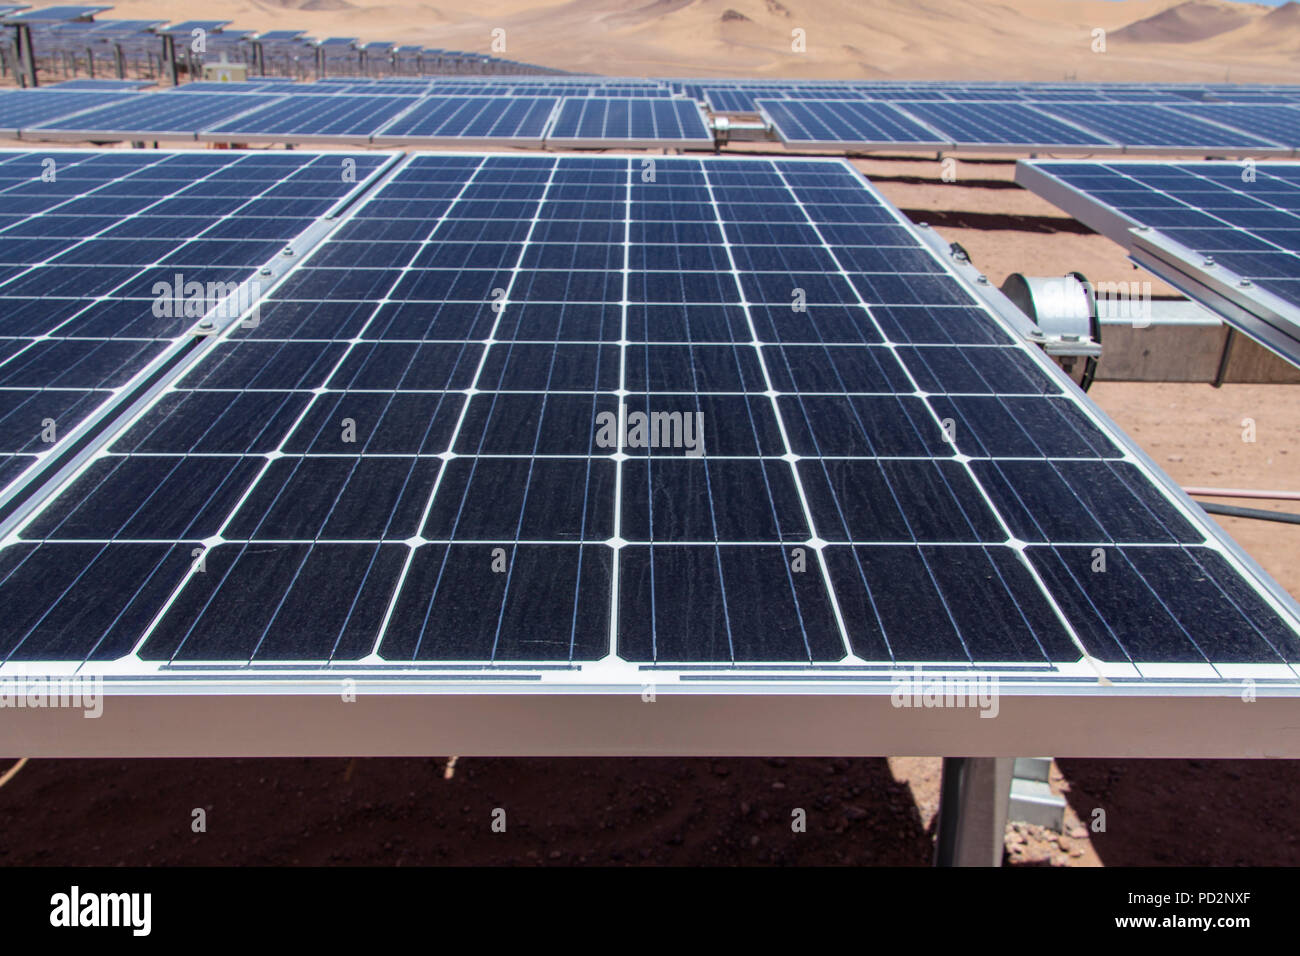 Solar Energy, a clean technology to reduce CO2 emissions, the best place for Solar Energy is Atacama Desert at Chile. Solar modules and cells. Stock Photo